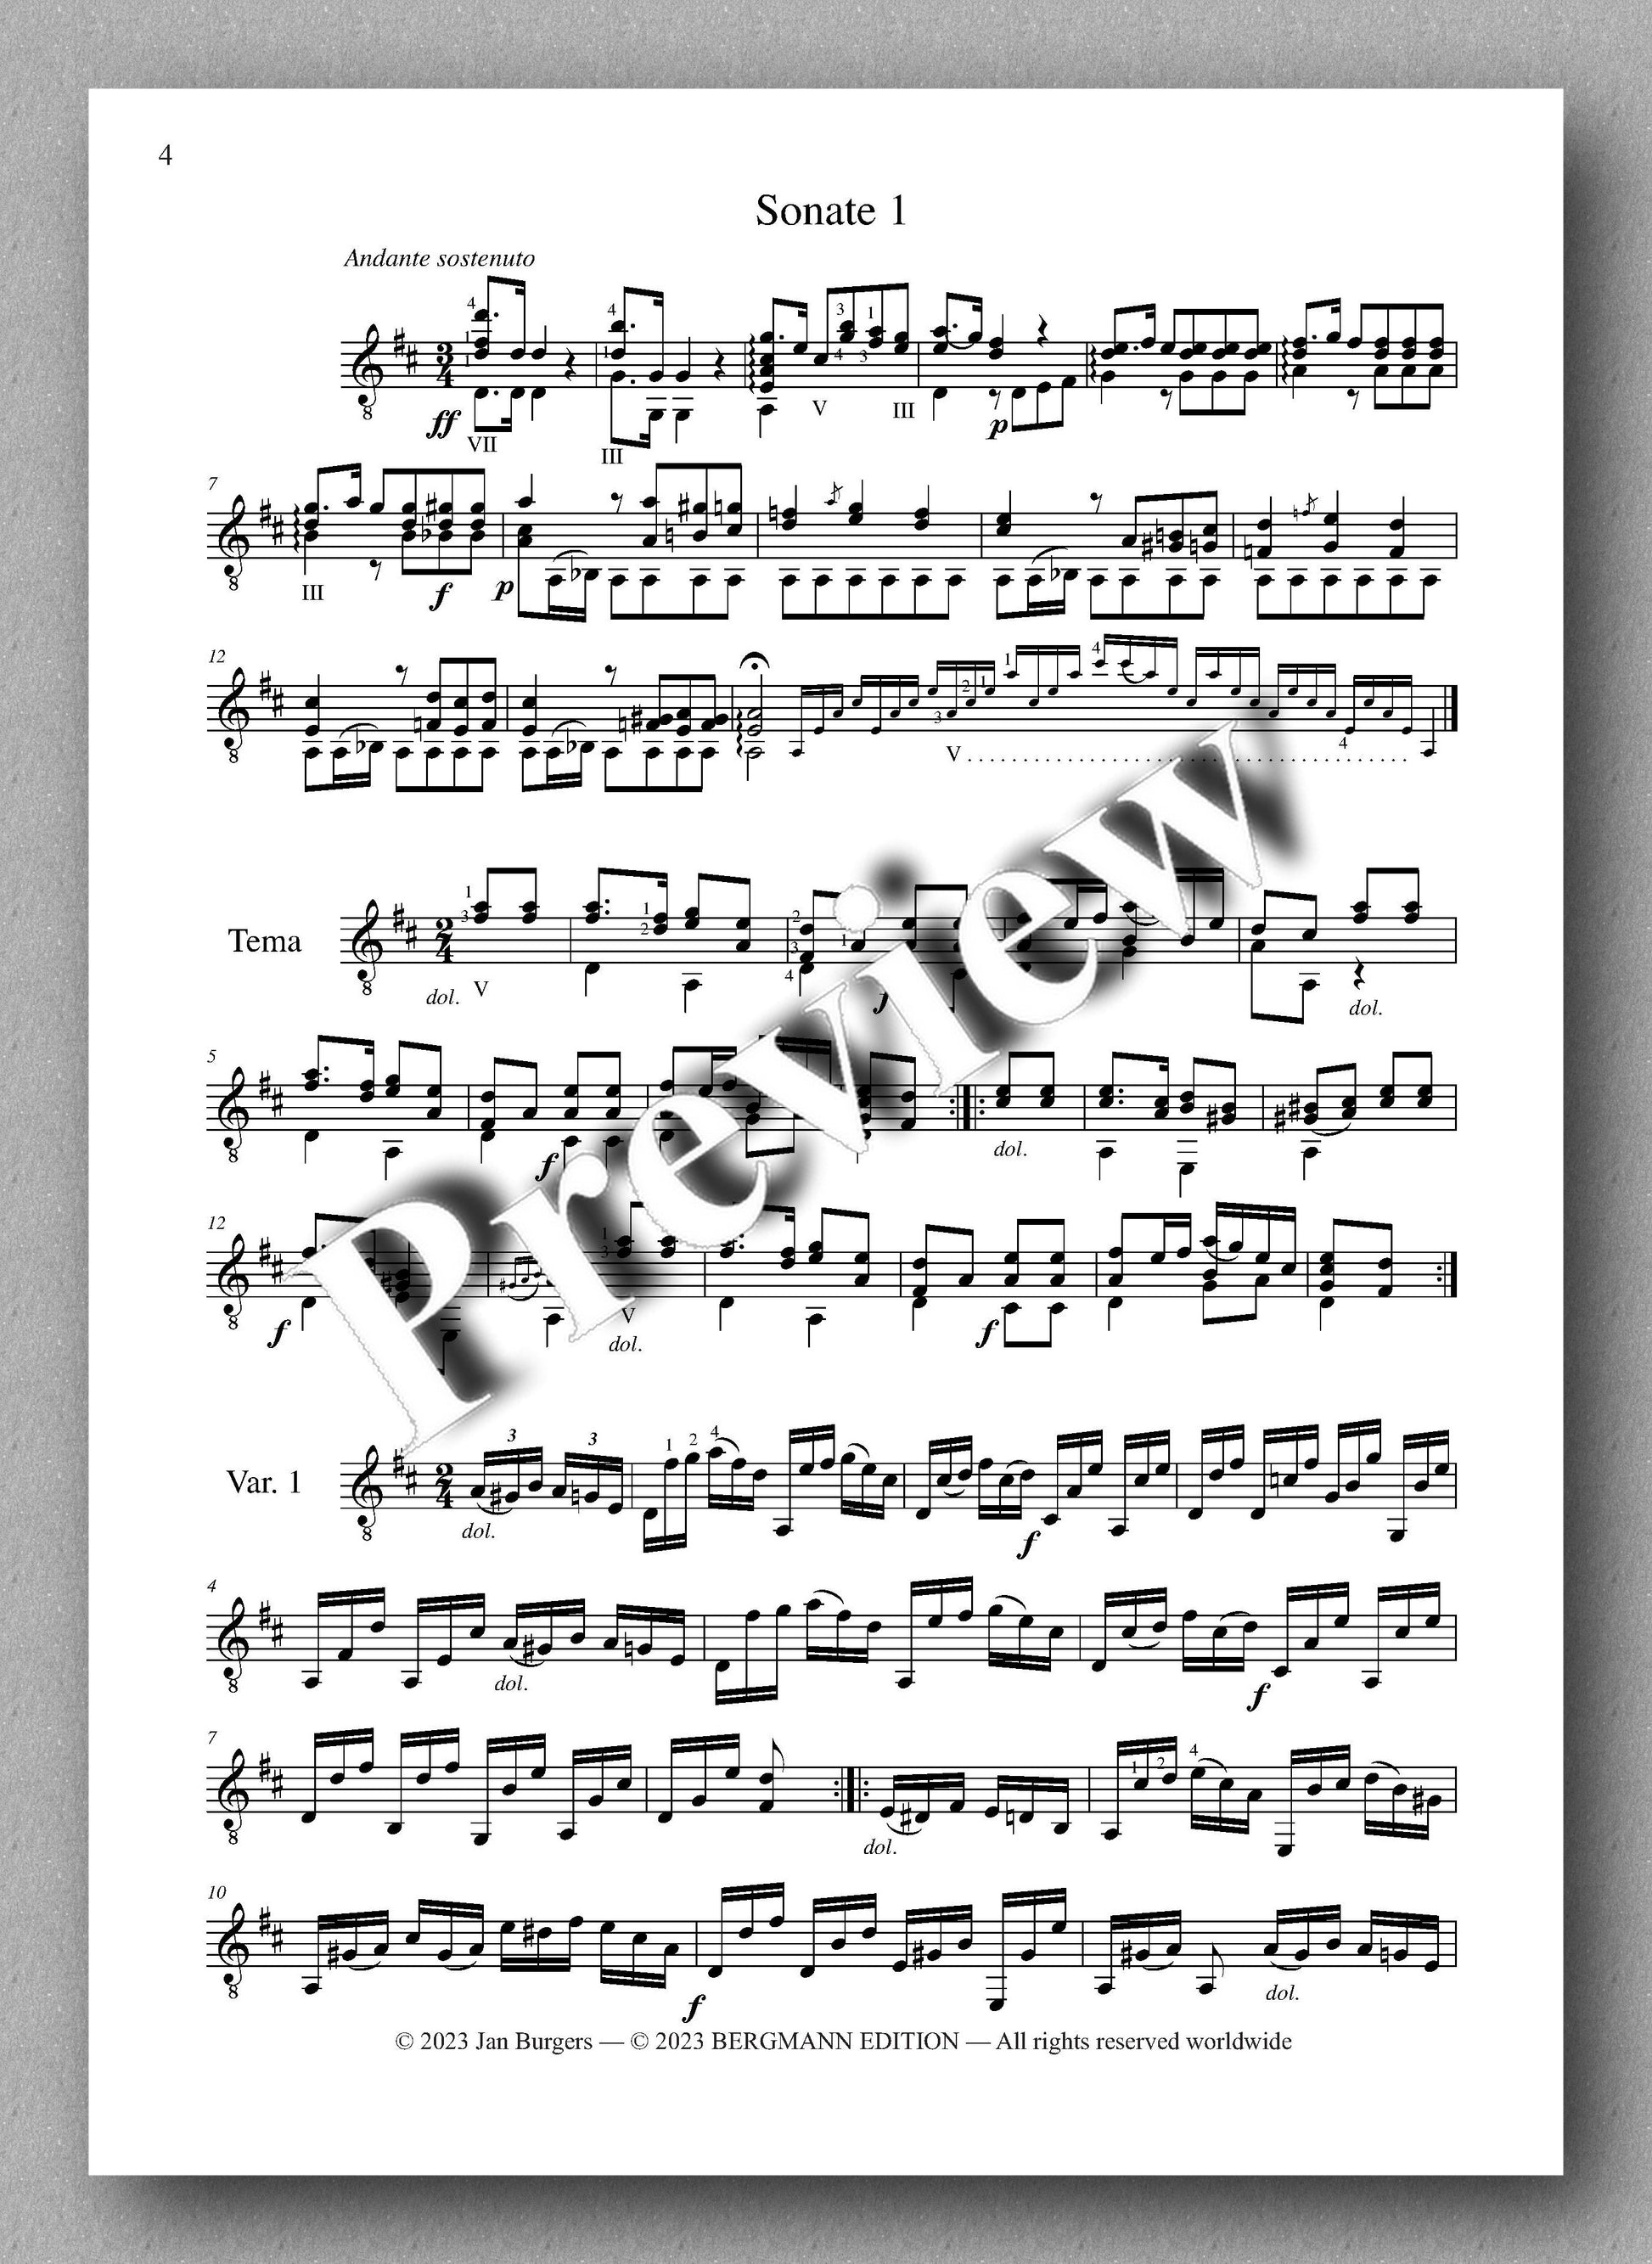 Molino, Collected Works for Guitar Solo, Vol. 18 - preview of the music score 1